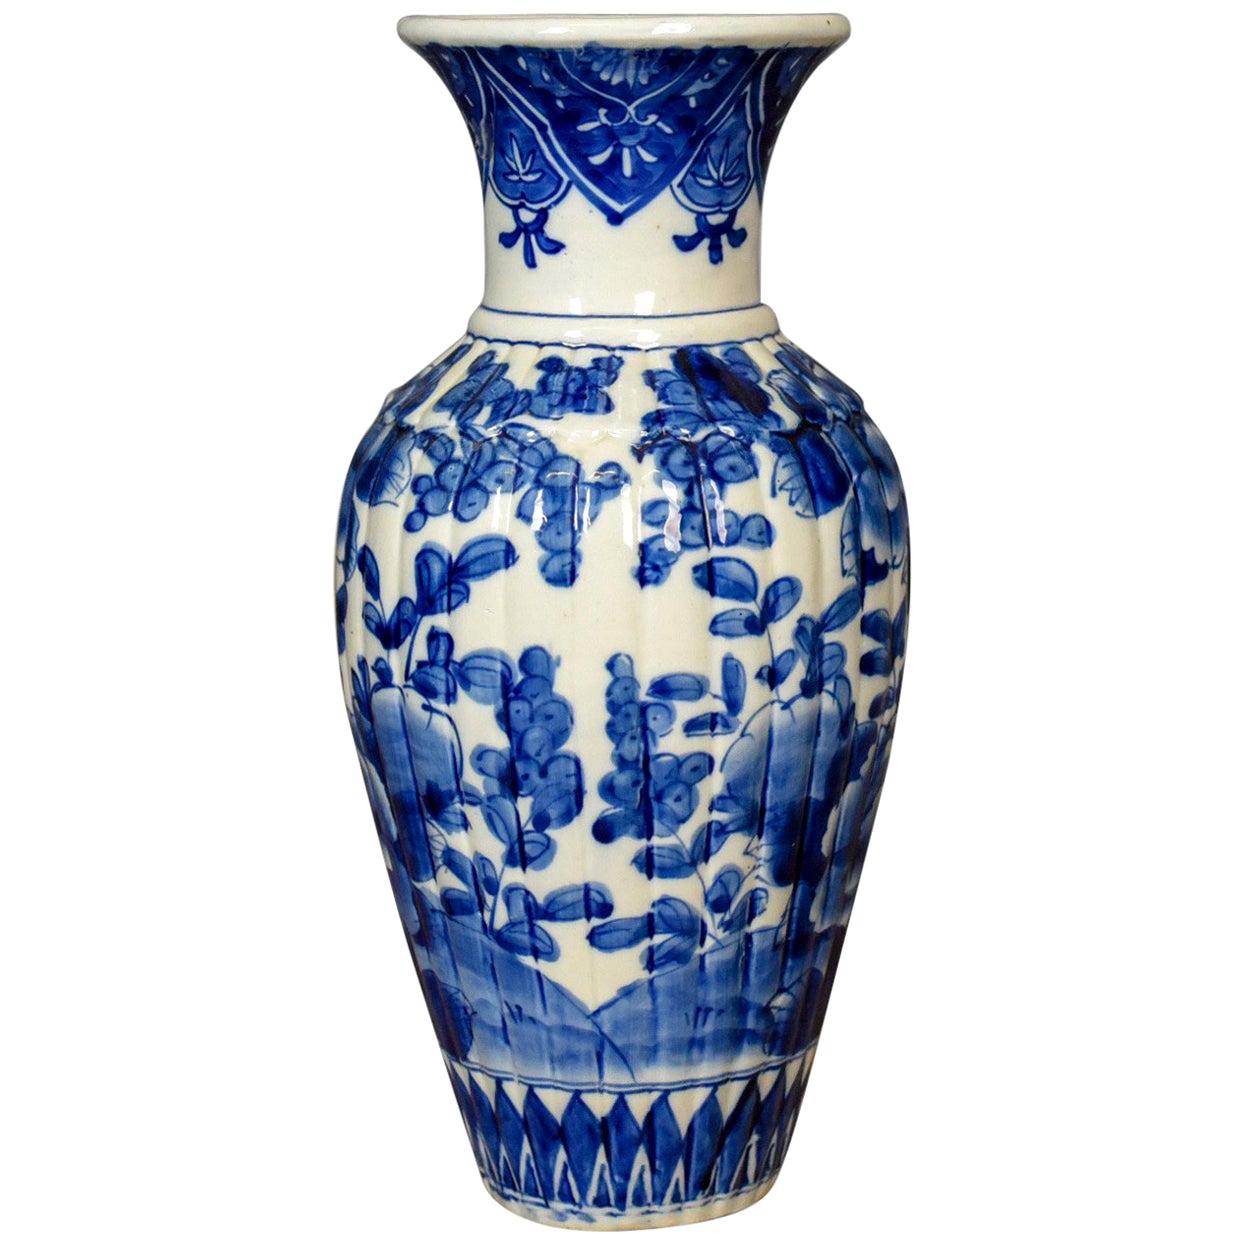 Blue and White Chinese Flower Vase Ceramic, China Pottery, Mid-Late 20th Century